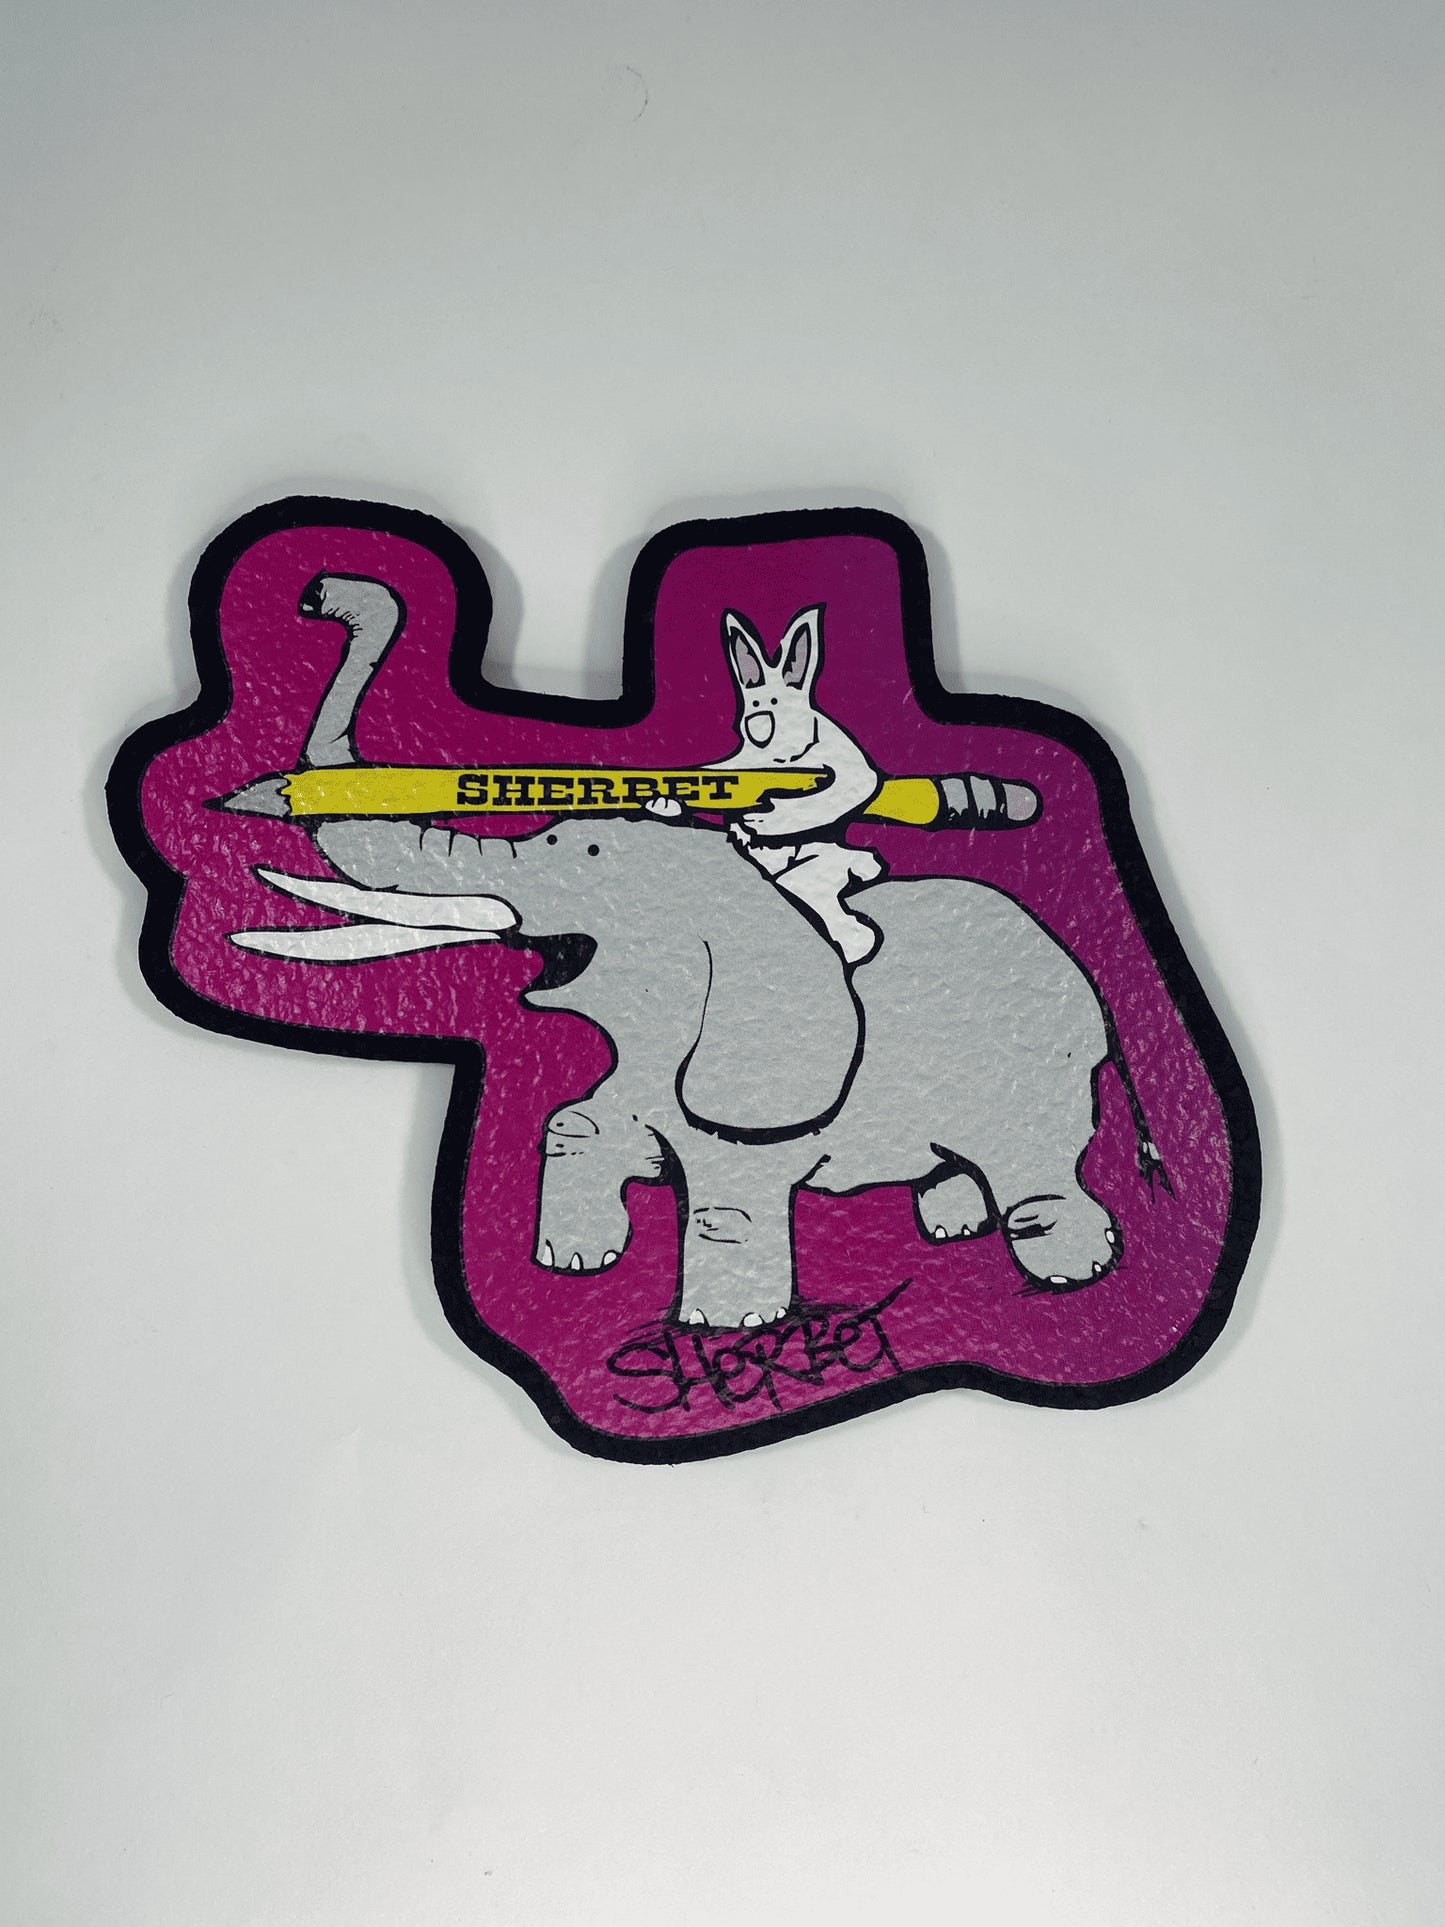 meticulously crafted art piece - Magenta Elephant & Bunny Moodmat by Sherbet Glass